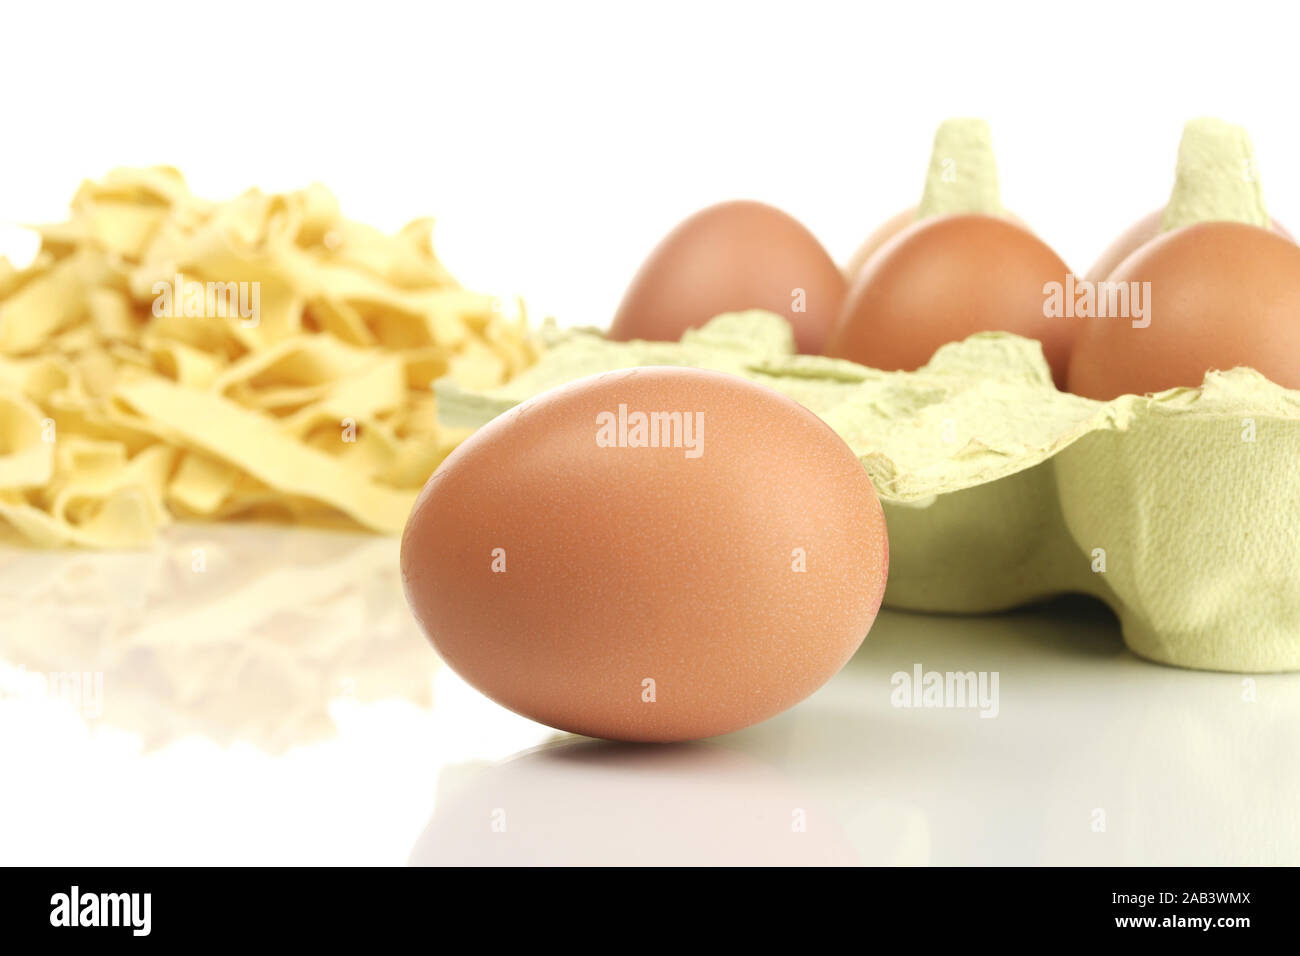 Packung frische Eier mit Nudeln |Package fresh egg with noodles| Stock Photo